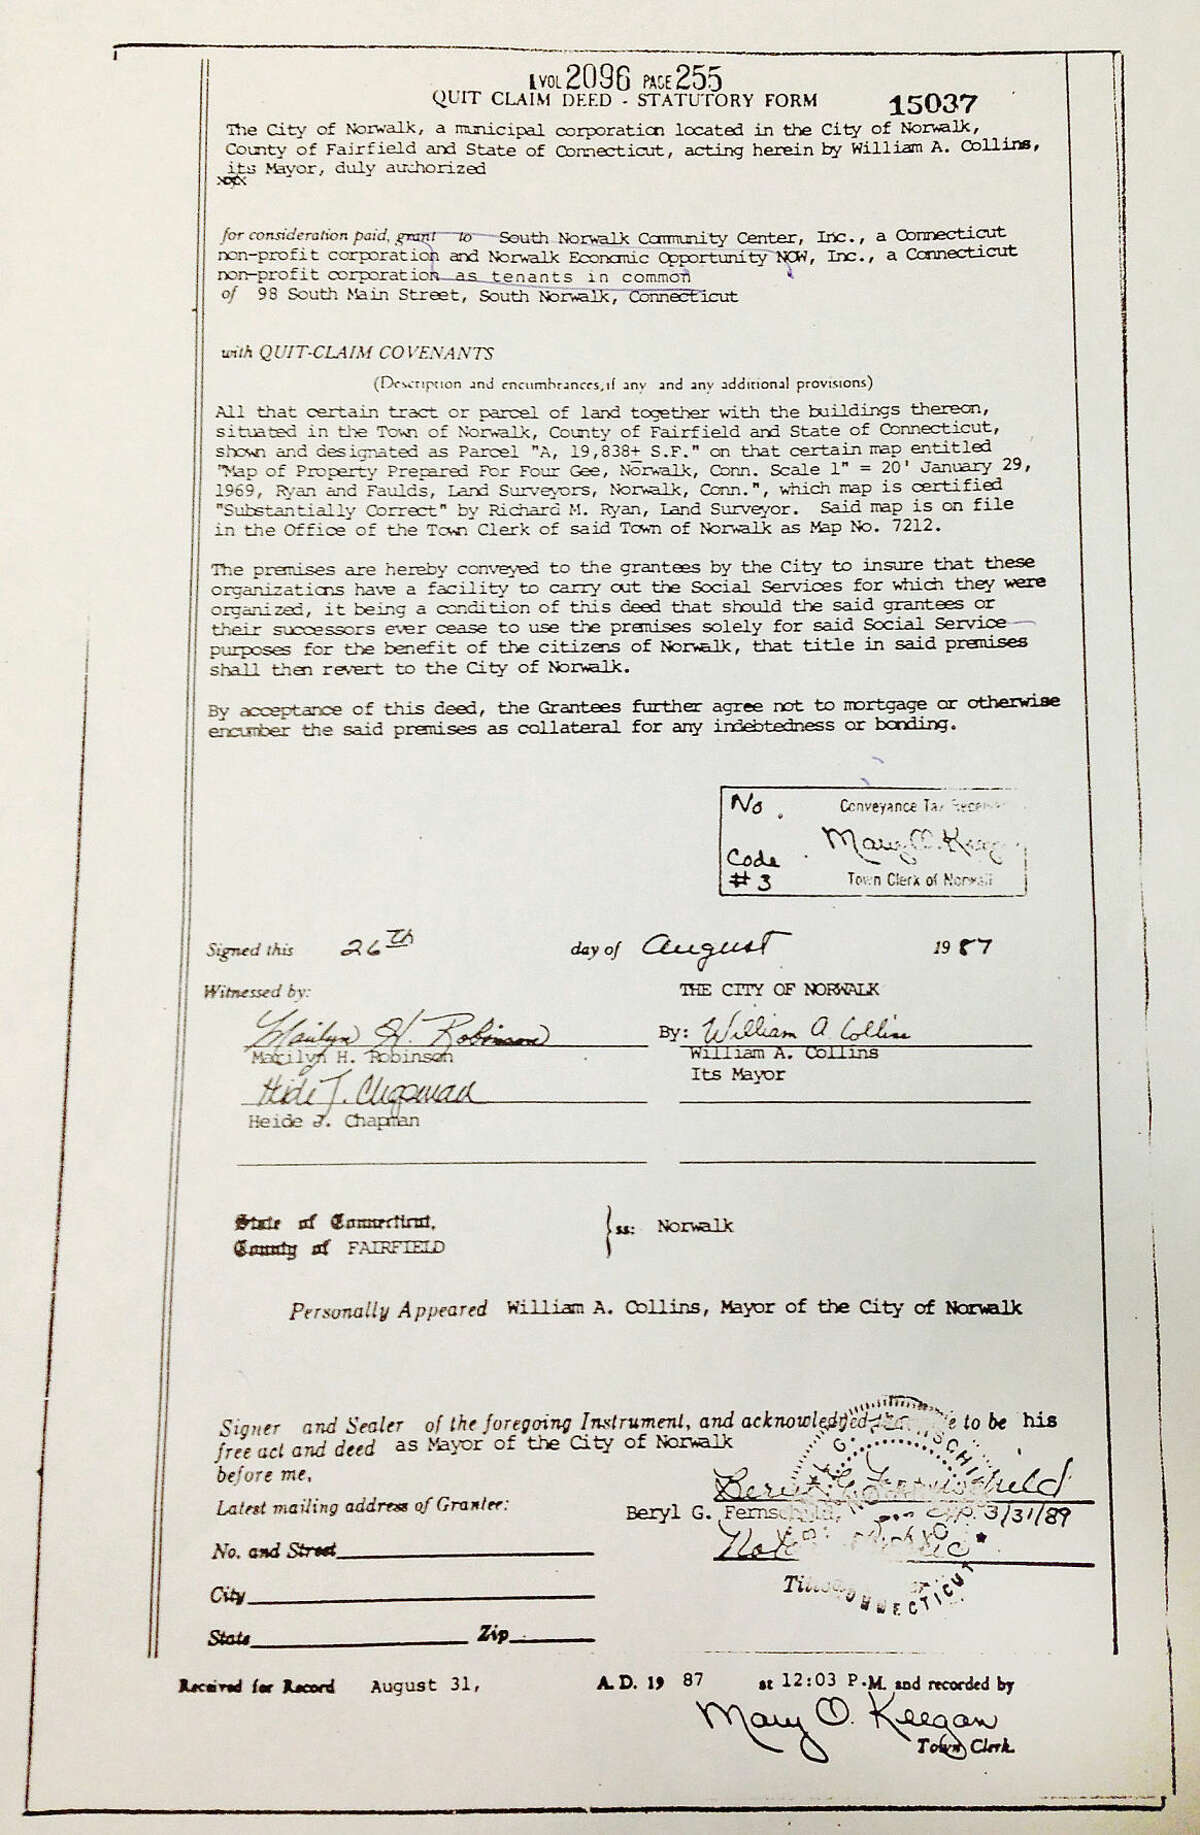 Contributed Part of the Quit Claim Deed for 98 South Main Street between the City of Norwalk and South Norwalk Community Center and Norwalk Economic Opportunity Now, signed in 1987.